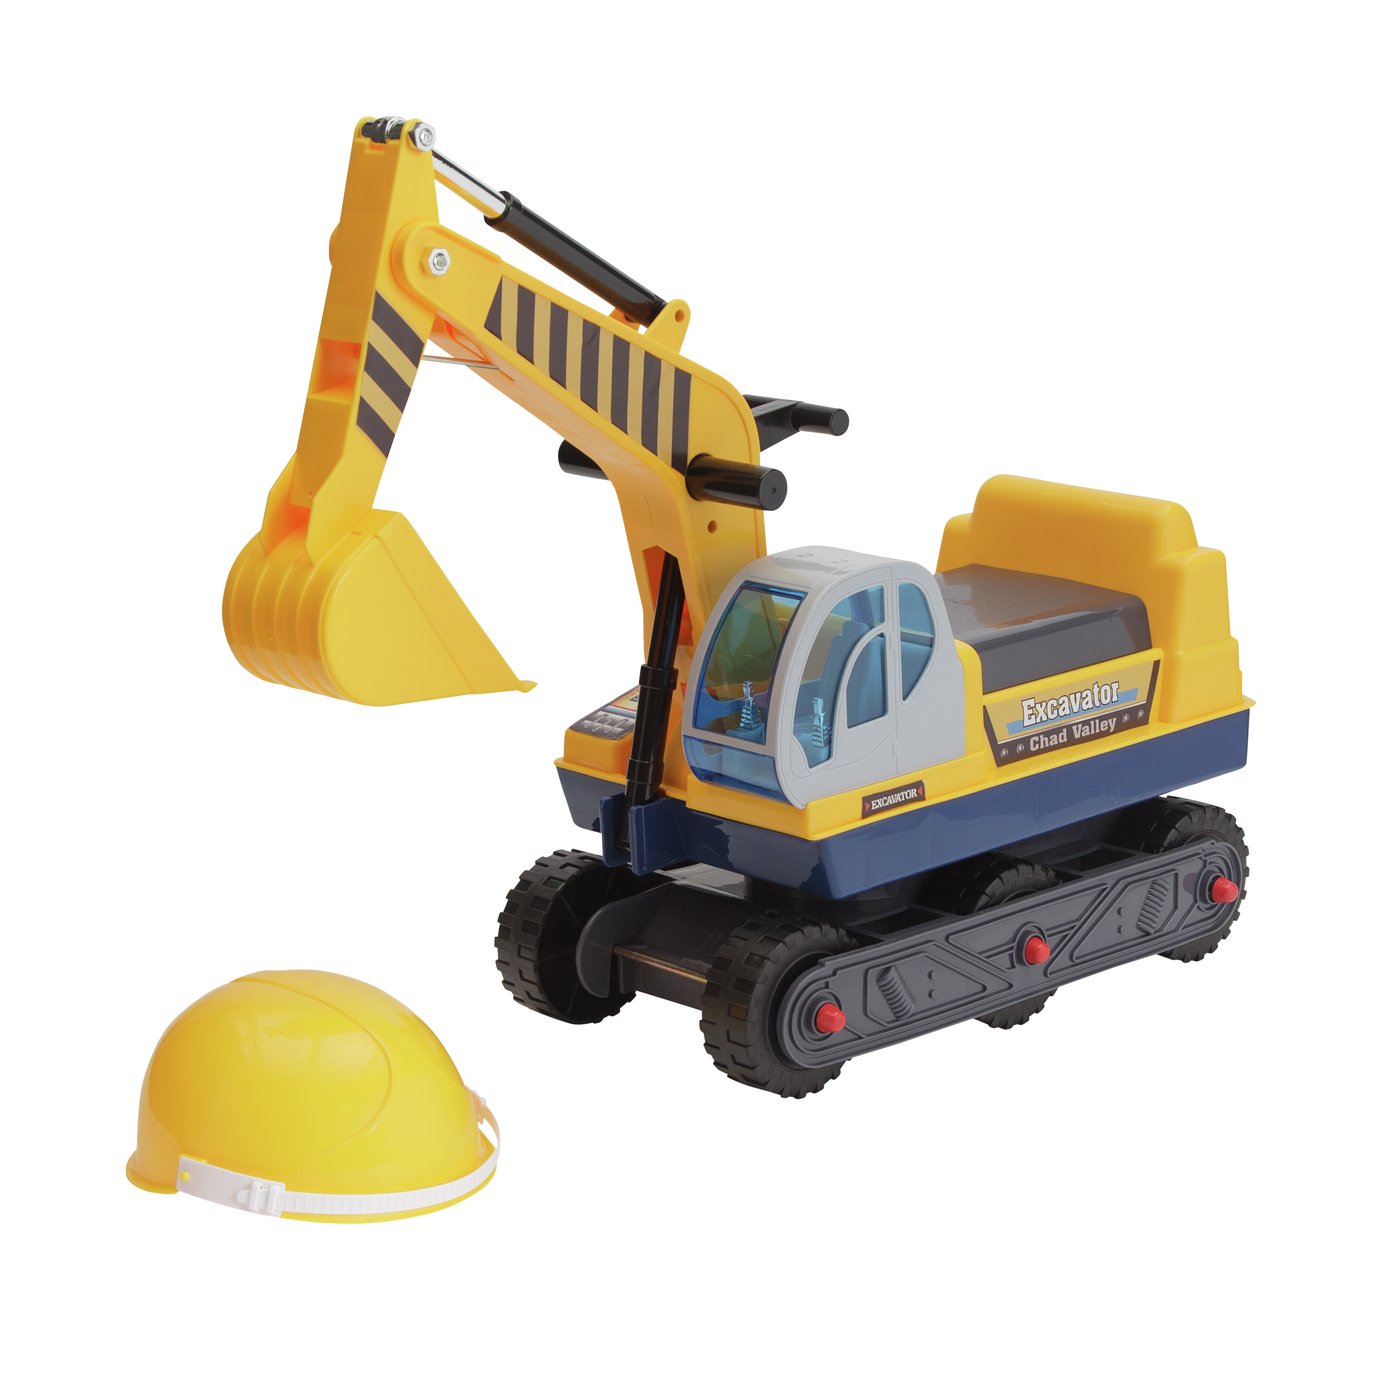 Chad Valley Foot To Floor Excavator review